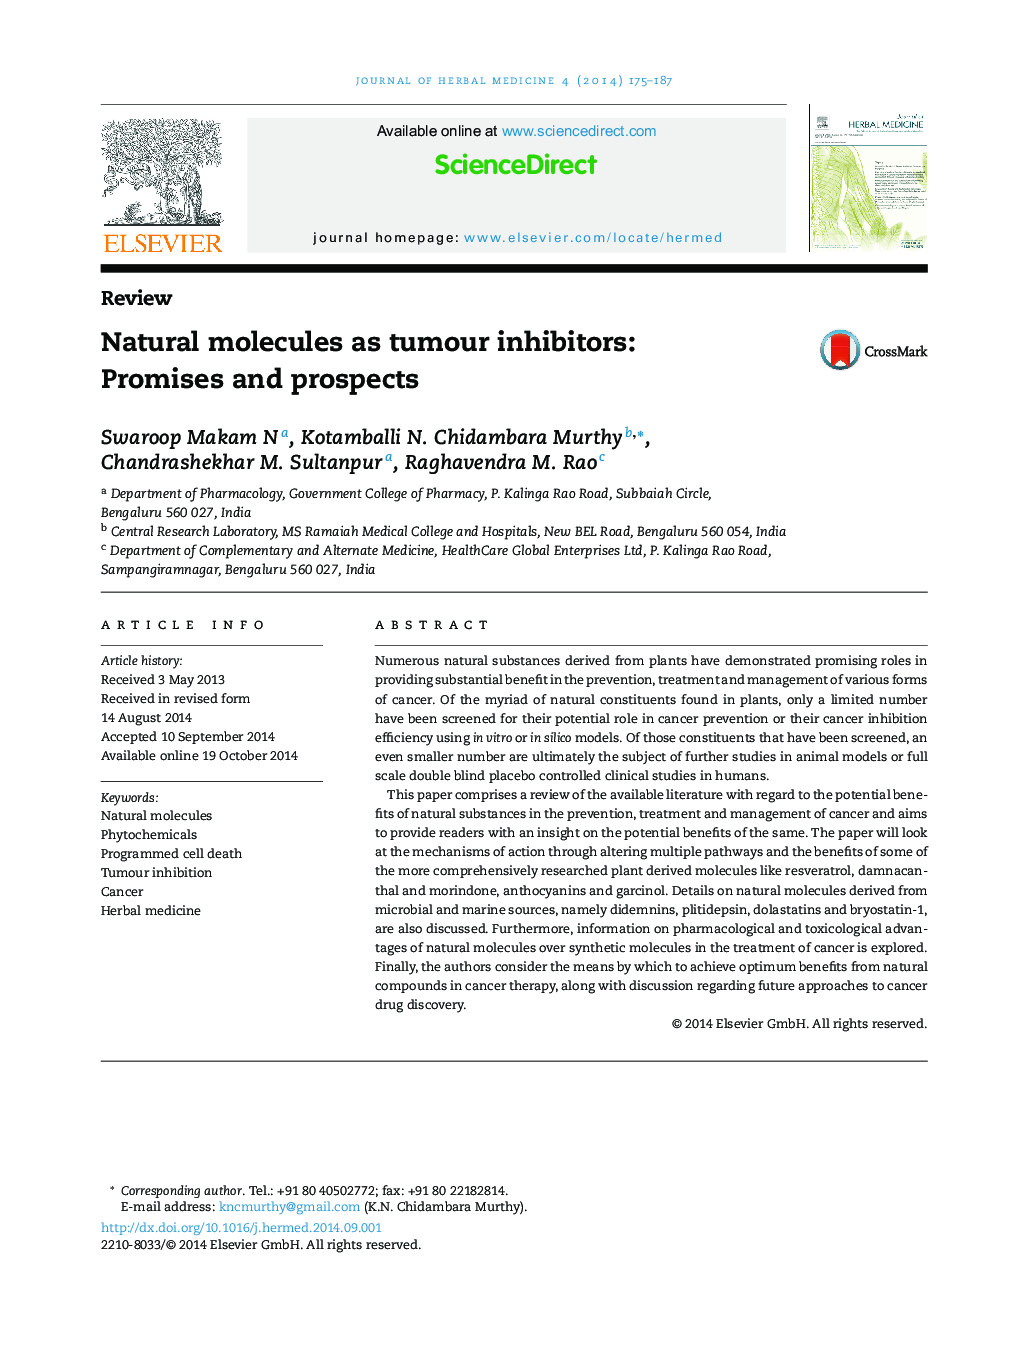 Natural molecules as tumour inhibitors: Promises and prospects